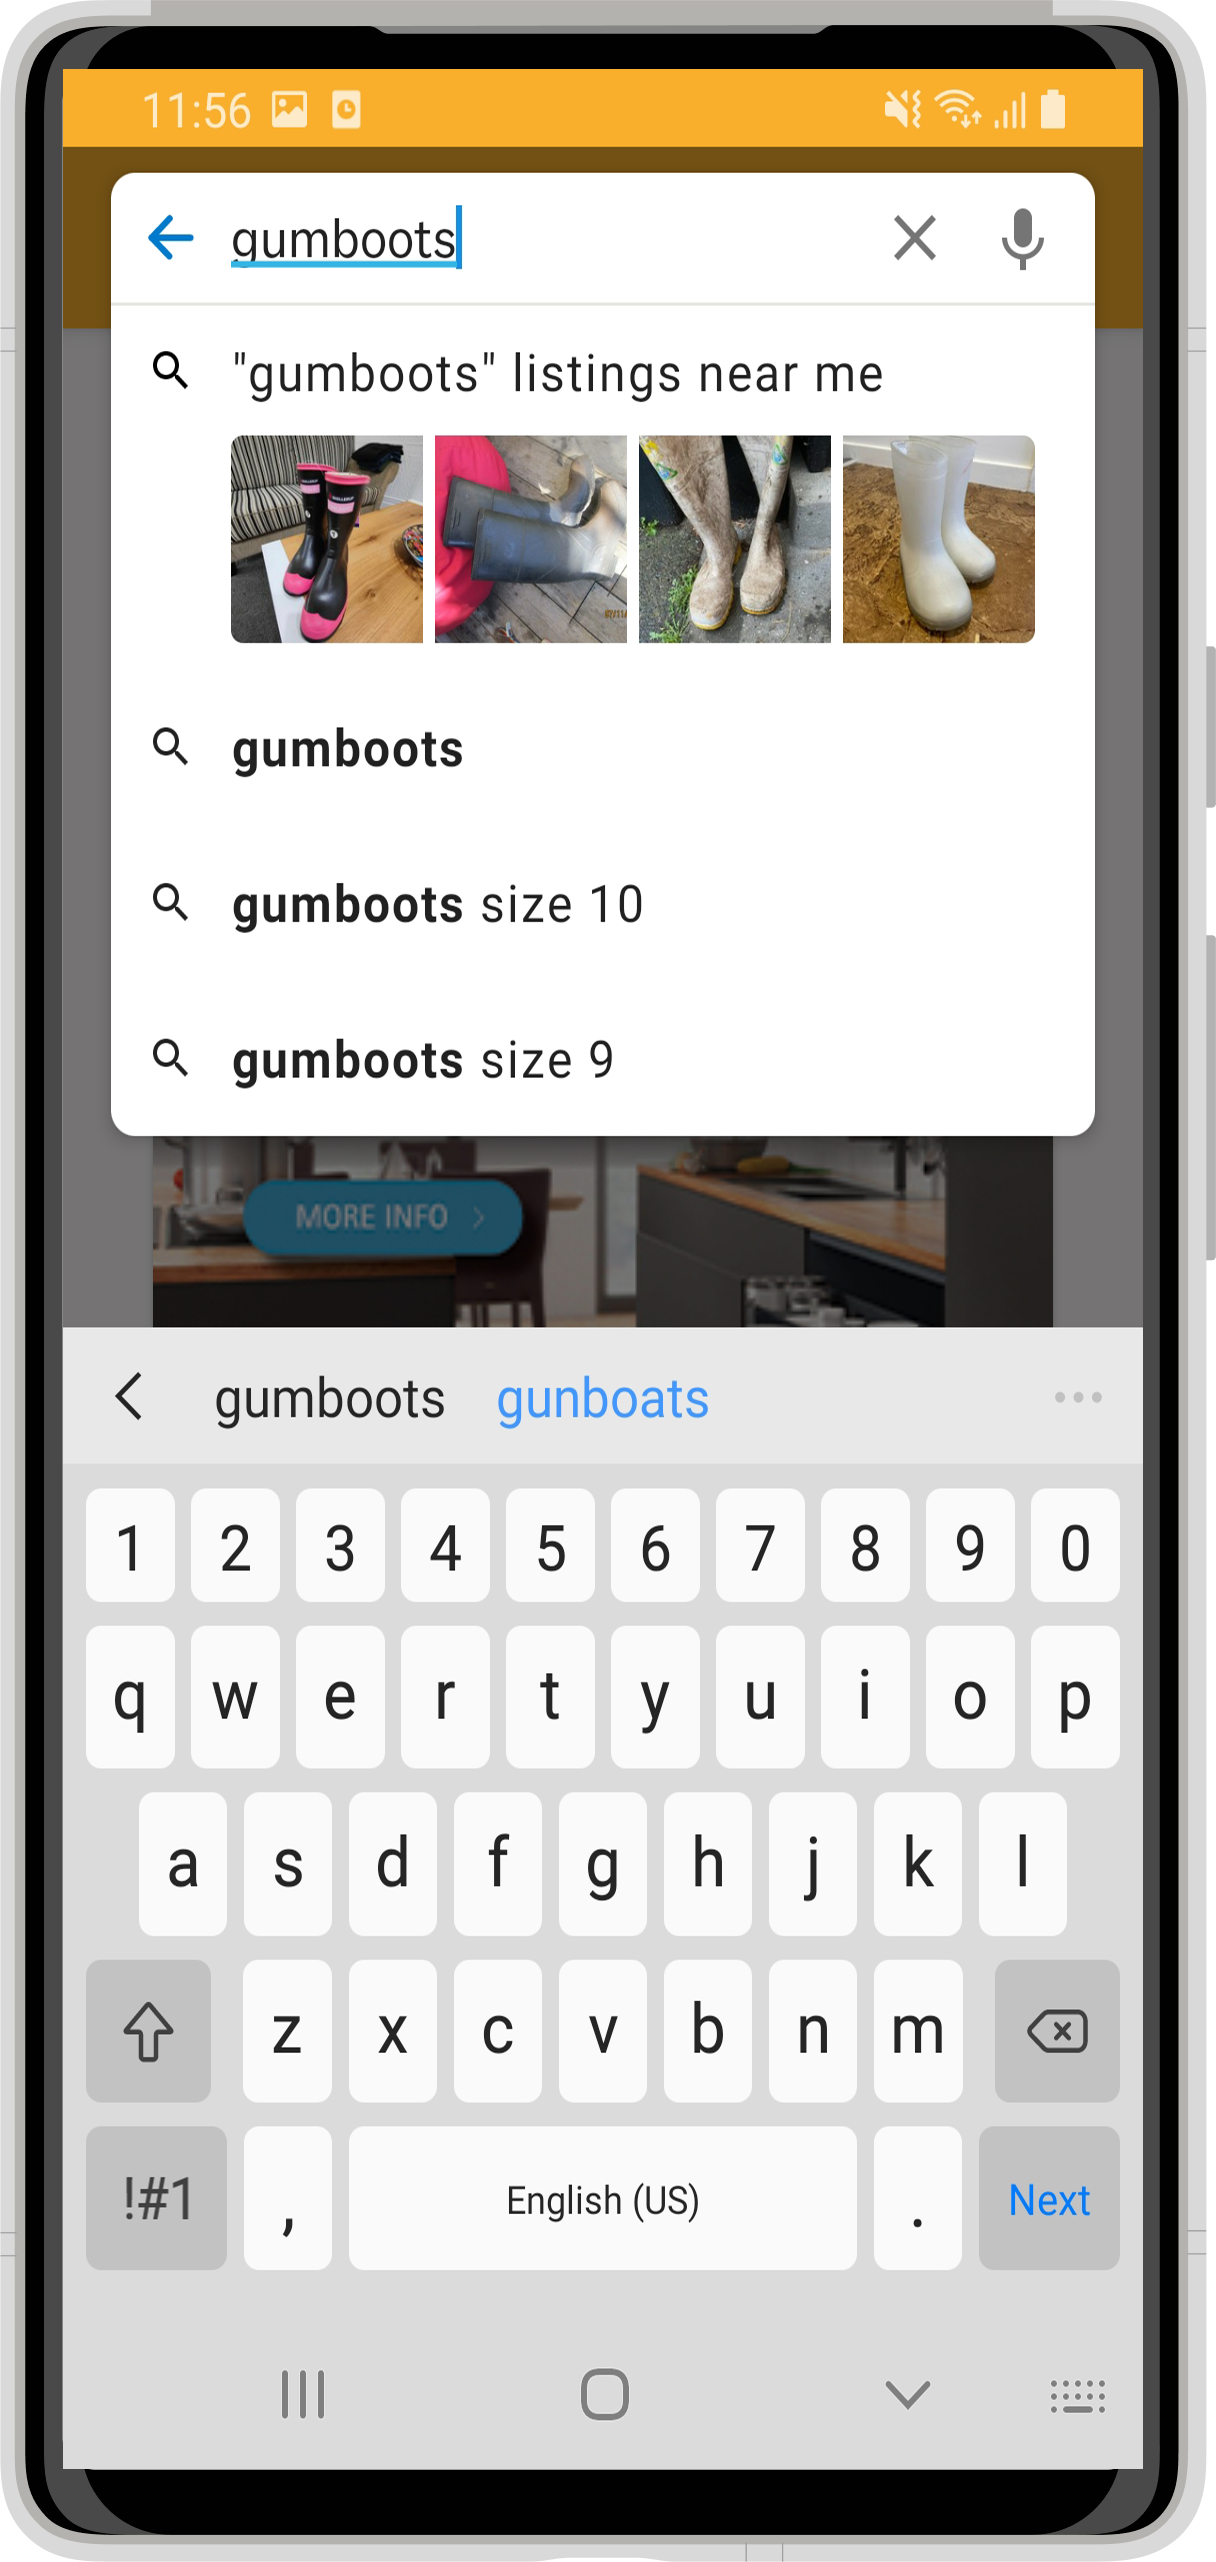 Keyword search using the Android app